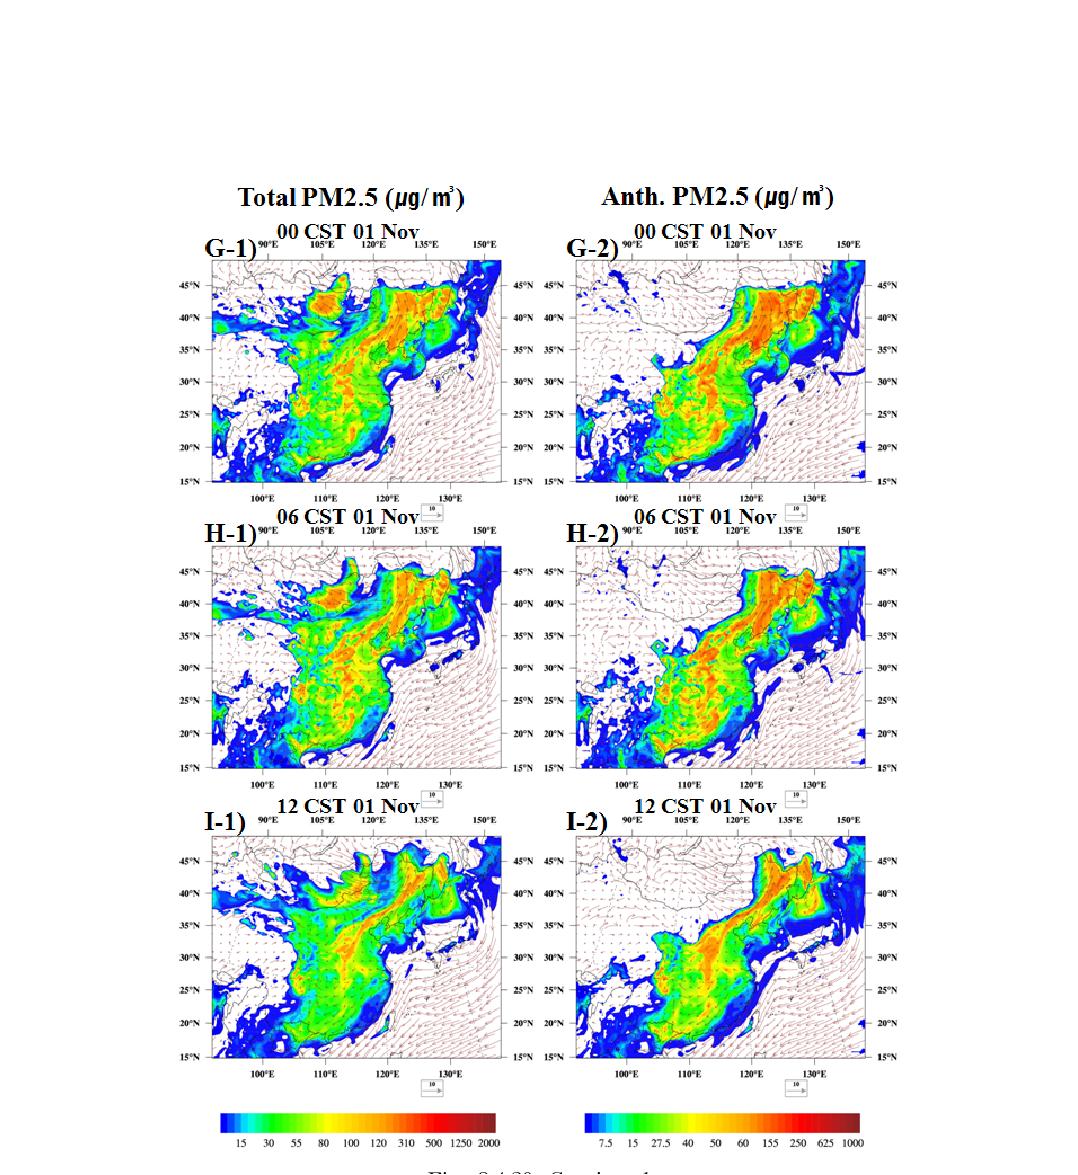 Horizontal distributions of near surface total PM2.5 (left panels) and anthropogenic PM2.5 (right panels) concentrations (µg m-3) simulated by Model 1 at (a) 1200 CST 30, (b) 1800 CST 30, (c) 0000 CST 31, (d) 0600 CST 31, (e) 1200 CST 31, (f) 1800 CST 31 October, (g) 0000 CST 1, (h) 0600 CST 1, (i) 1200 CST 1, (j) 1800 CST 1, (k) 0000 CST 2, (l) 0600 CST 2 November 2011.